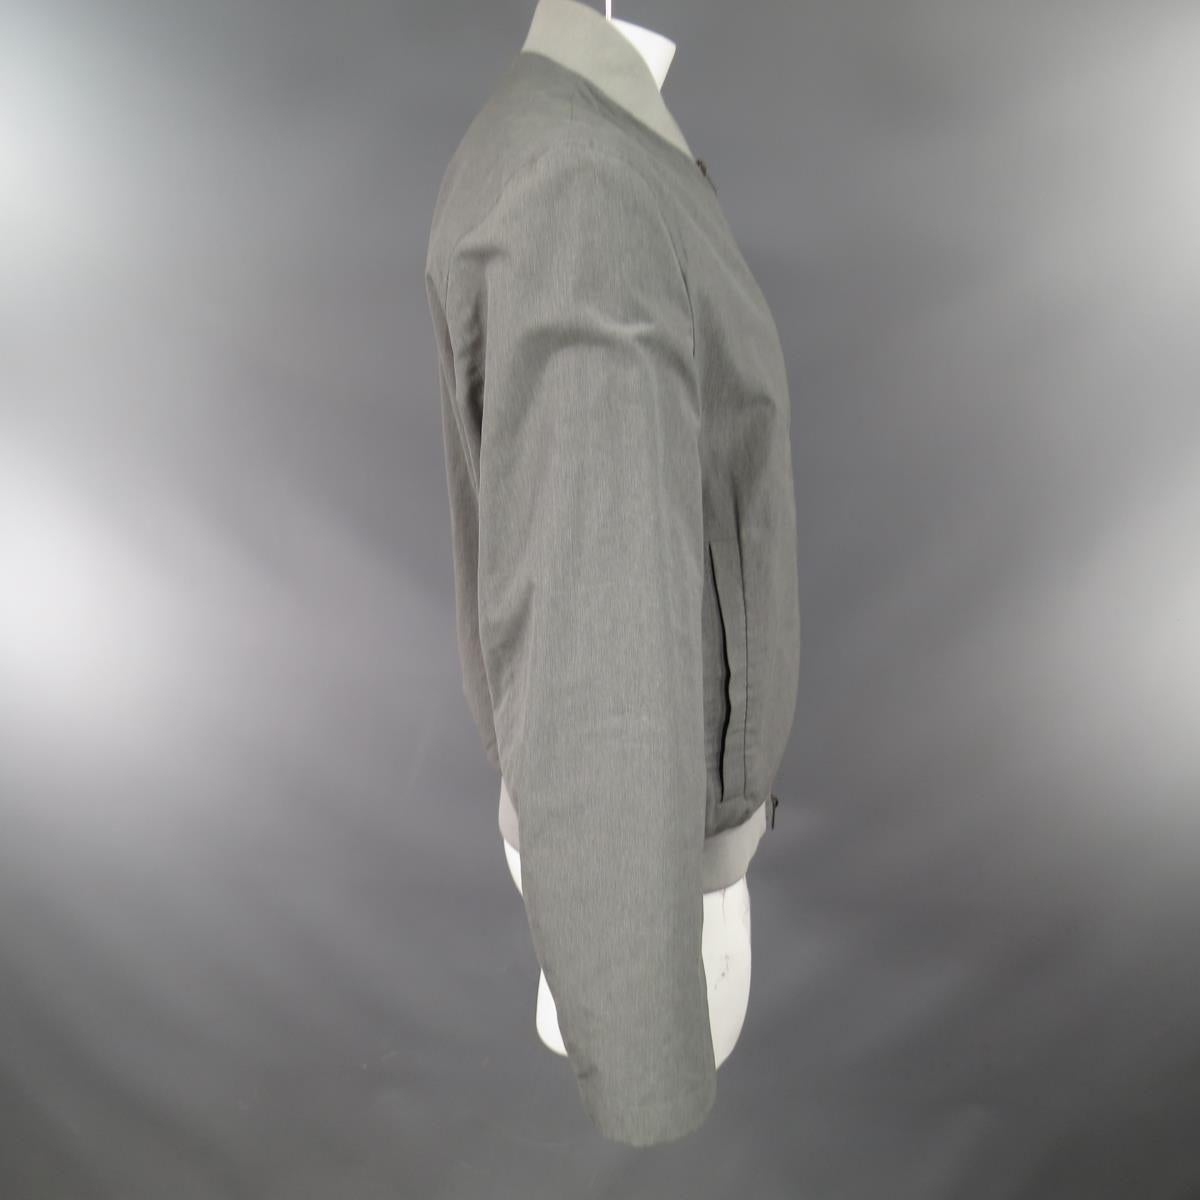 JIL SANDER jacket comes in a silver cotton silk blend featuring a silver ribbed neck, waist band, double zipper front, and double slit pockets. Minor discoloration throughout. Made in Italy.

Good Pre-Owned Condition.
Marked: